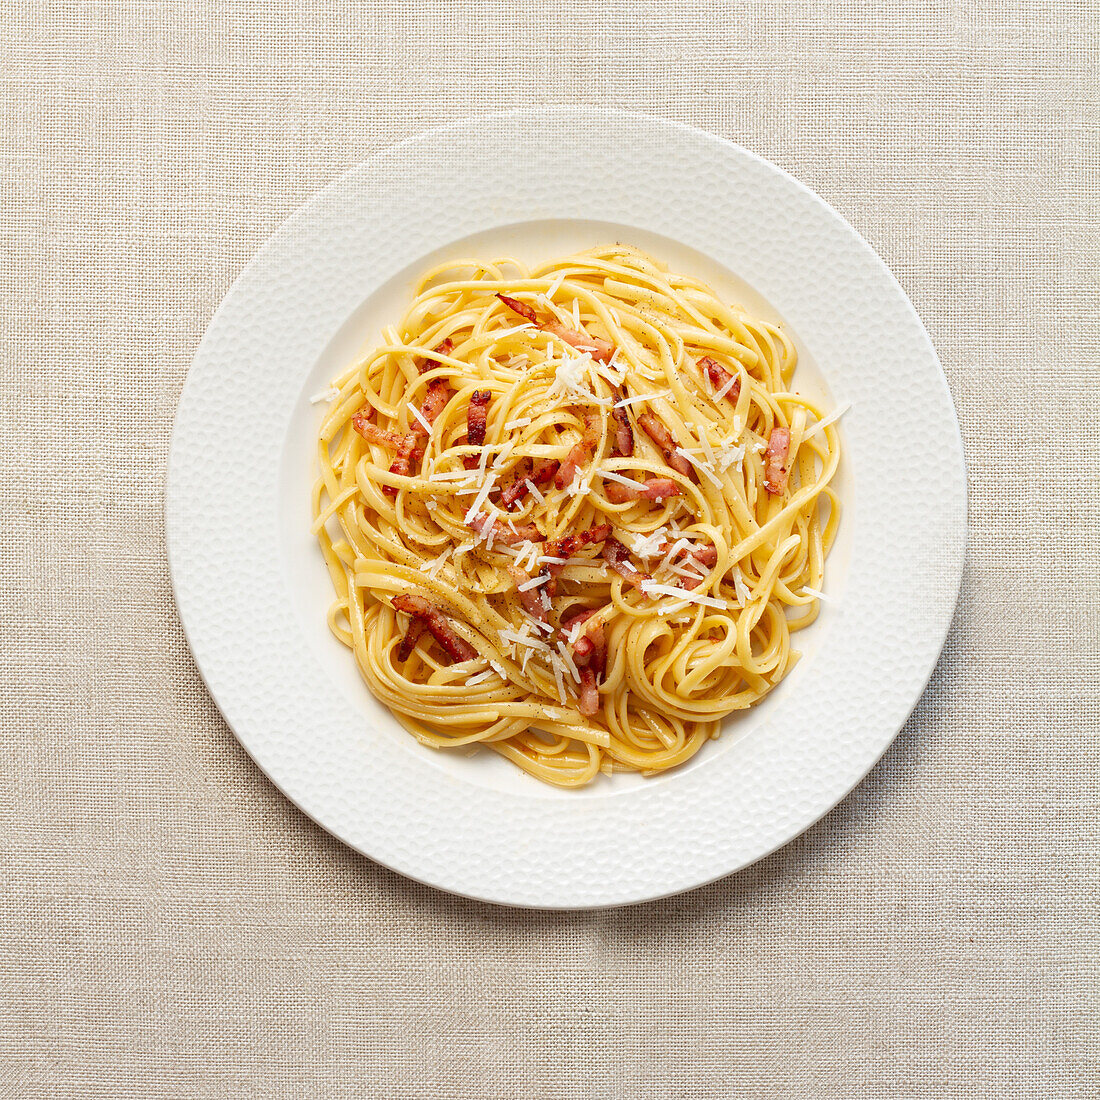 A top view of a classic Italian spaghetti carbonara, garnished with grated cheese and crispy bacon, served on a white textured background.